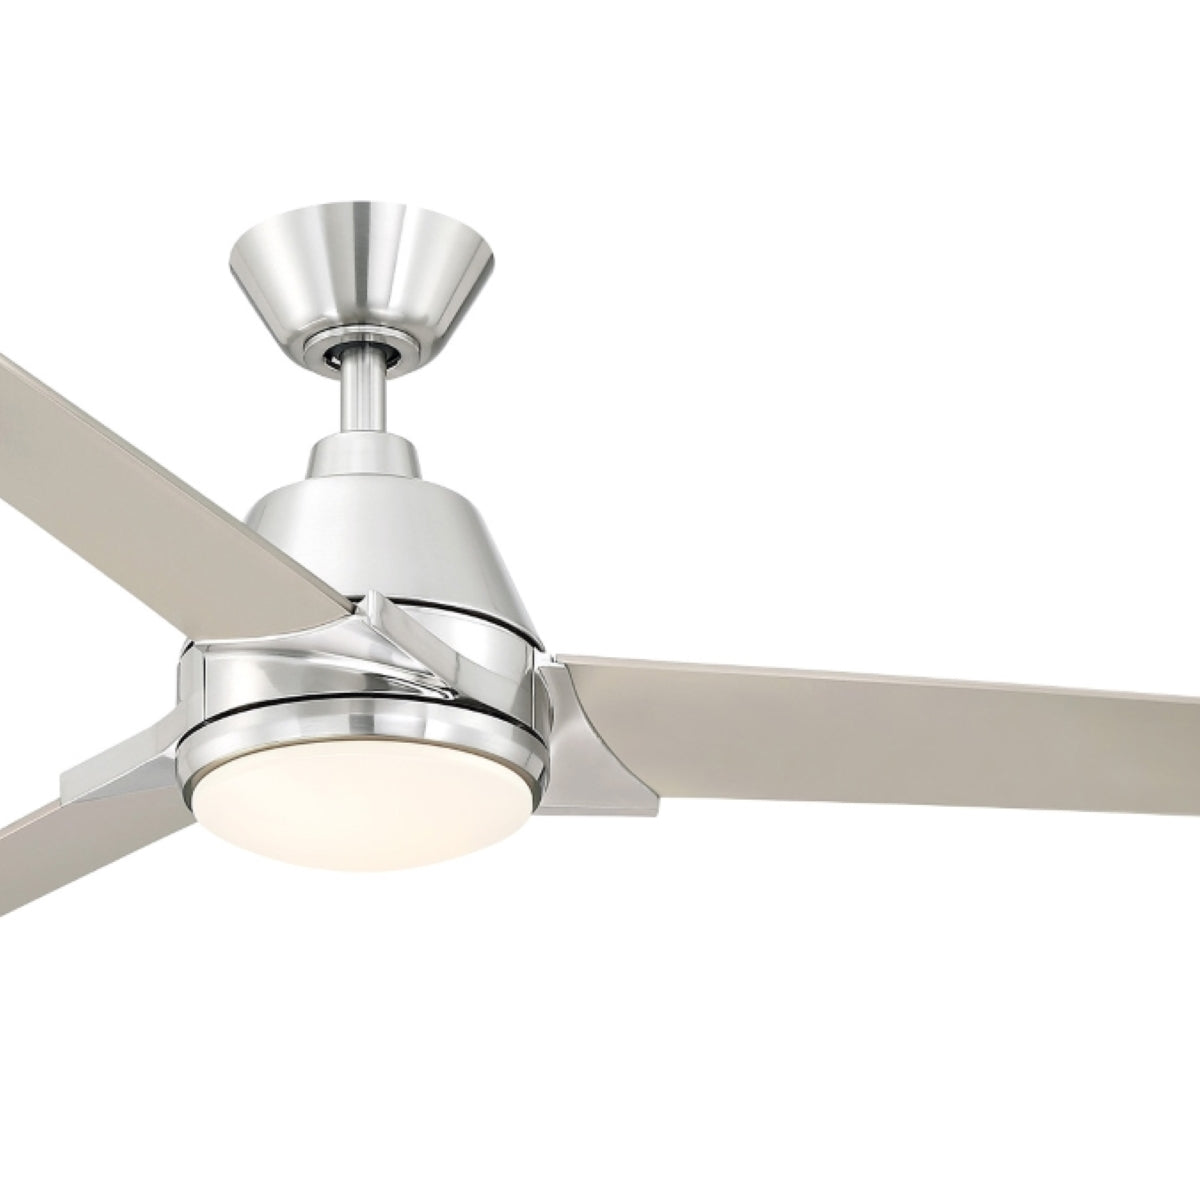 Pyramid 52 Inch Indoor/Outdoor Ceiling Fan With Light and Remote